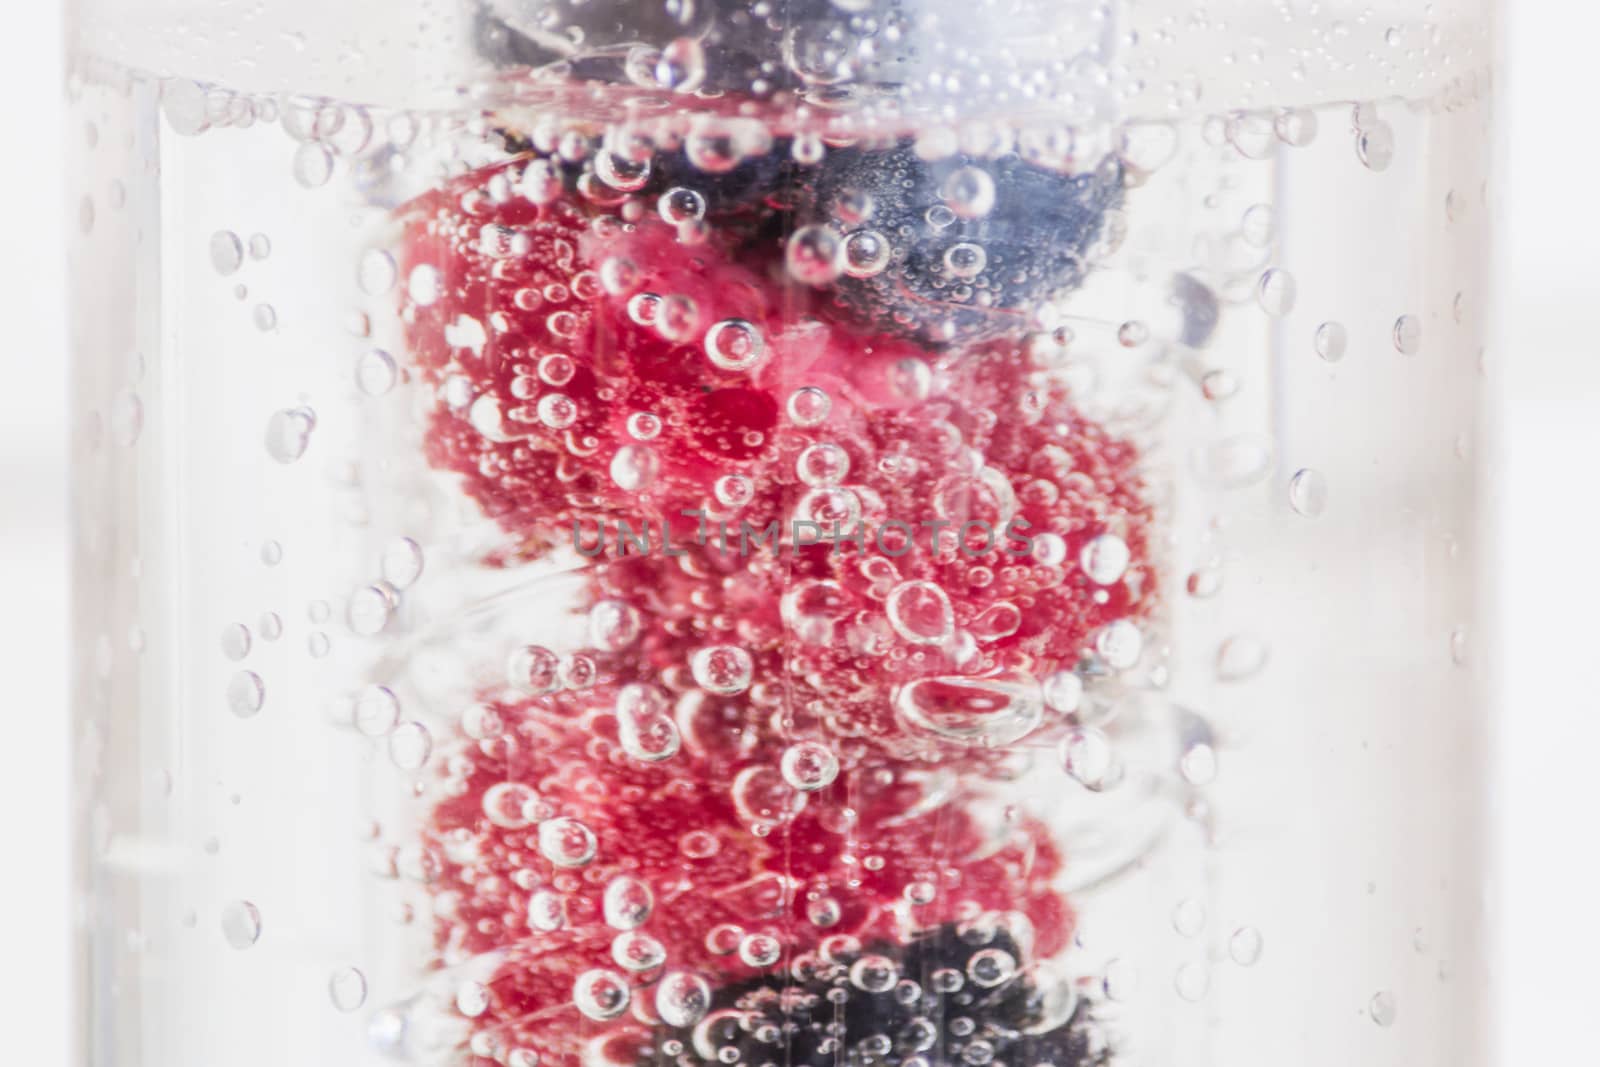 Berry fruits raspberries and blackberries in a row in a glass of mineral water.